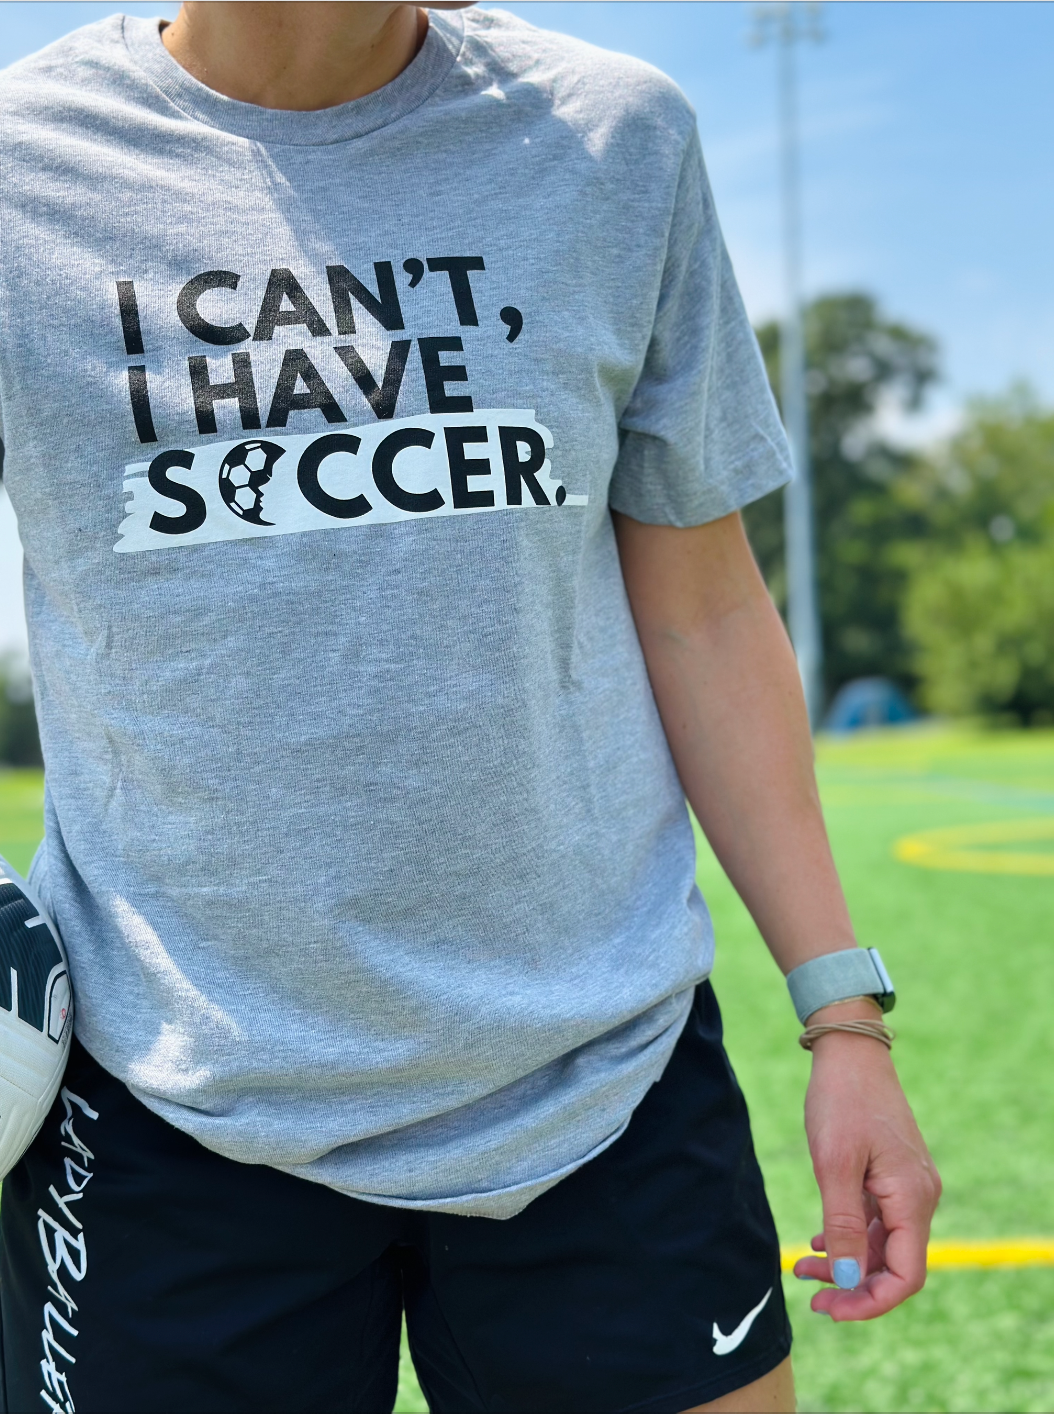 I Can't, I Have Soccer T-Shirt